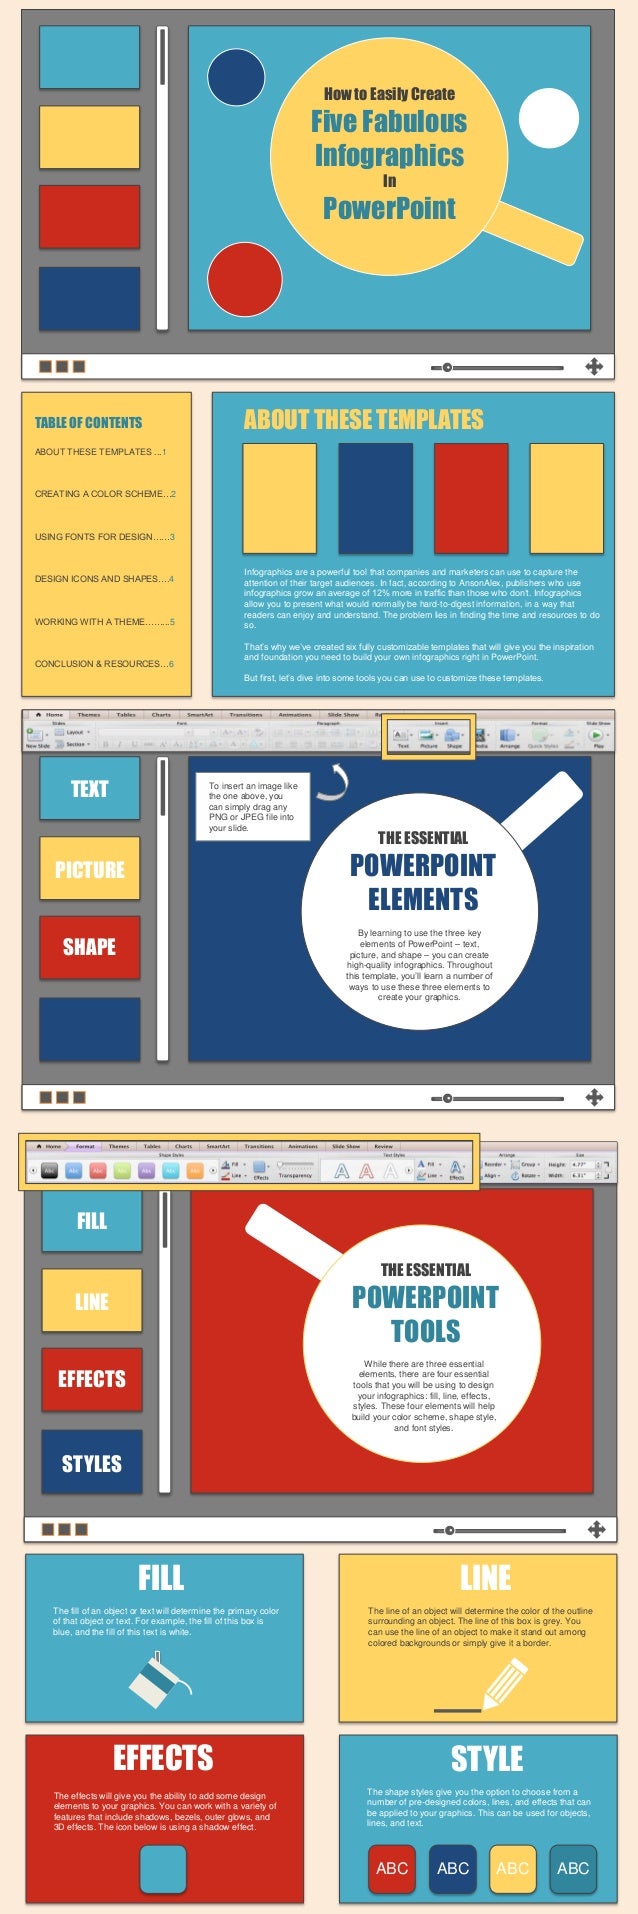 How to Easily Create
Five Fabulous
Infographics
In
PowerPoint
TABLE OF CONTENTS
ABOUT THESE TEMPLATES ...1
CREATING A COLOR SCHEME…2
USING FONTS FOR DESIGN……3
DESIGN ICONS AND SHAPES….4
WORKING WITH A THEME……...5
CONCLUSION & RESOURCES…6
ABOUT THESE TEMPLATES
Infographics are a powerful tool that companies and marketers can use to capture the
attention of their target audiences. In fact, according to AnsonAlex, publishers who use
infographics grow an average of 12% more in traffic than those who don’t. Infographics
allow you to present what would normally be hard-to-digest information, in a way that
readers can enjoy and understand. The problem lies in finding the time and resources to do
so.
That’s why we’ve created six fully customizable templates that will give you the inspiration
and foundation you need to build your own infographics right in PowerPoint.
But first, let’s dive into some tools you can use to customize these templates.
THE ESSENTIAL
POWERPOINT
TOOLS
FILL
LINE
EFFECTS
STYLES
While there are three essential
elements, there are four essential
tools that you will be using to design
your infographics: fill, line, effects,
styles. These four elements will help
build your color scheme, shape style,
and font styles.
FILL
The fill of an object or text will determine the primary color
of that object or text. For example, the fill of this box is
blue, and the fill of this text is white.
LINE
The line of an object will determine the color of the outline
surrounding an object. The line of this box is grey. You
can use the line of an object to make it stand out among
colored backgrounds or simply give it a border.
EFFECTS
The effects will give you the ability to add some design
elements to your graphics. You can work with a variety of
features that include shadows, bezels, outer glows, and
3D effects. The icon below is using a shadow effect.
STYLE
The shape styles give you the option to choose from a
number of pre-designed colors, lines, and effects that can
be applied to your graphics. This can be used for objects,
lines, and text.
ABC ABC ABC ABC
THE ESSENTIAL
POWERPOINT
ELEMENTS
TEXT
PICTURE
SHAPE
By learning to use the three key
elements of PowerPoint – text,
picture, and shape – you can create
high-quality infographics. Throughout
this template, you’ll learn a number of
ways to use these three elements to
create your graphics.
To insert an image like
the one above, you
can simply drag any
PNG or JPEG file into
your slide.
 